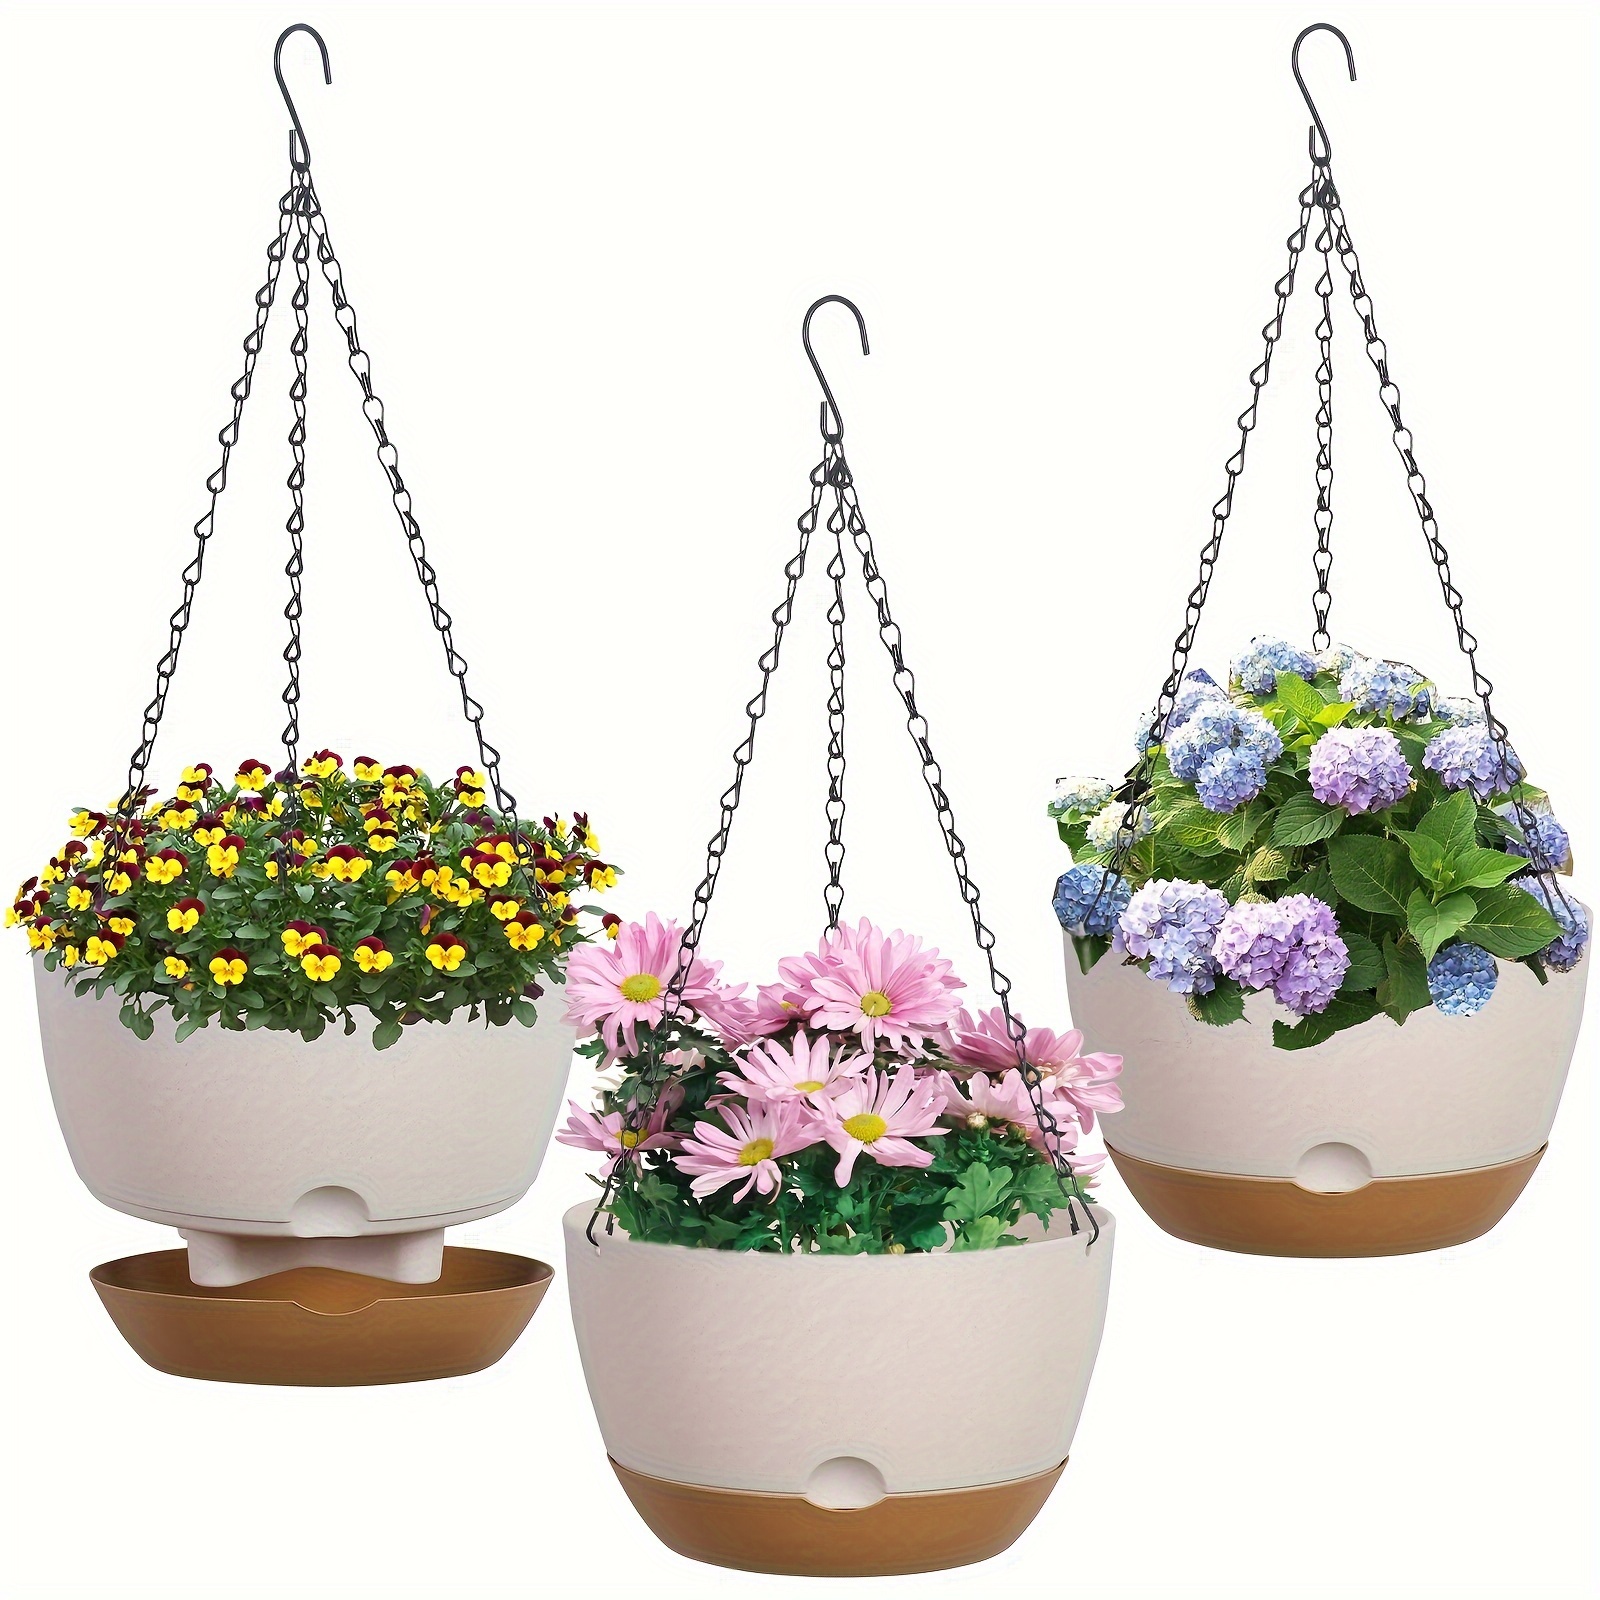 

3 Packs, Hanging Planter Set, 8 Inch Hanging Pot With Drainage Hole For Indoor Outdoor Plants, Plastic Hanging Plant Pot With Chain And Removable Tray, Garden Porch Balcony Patio Decor